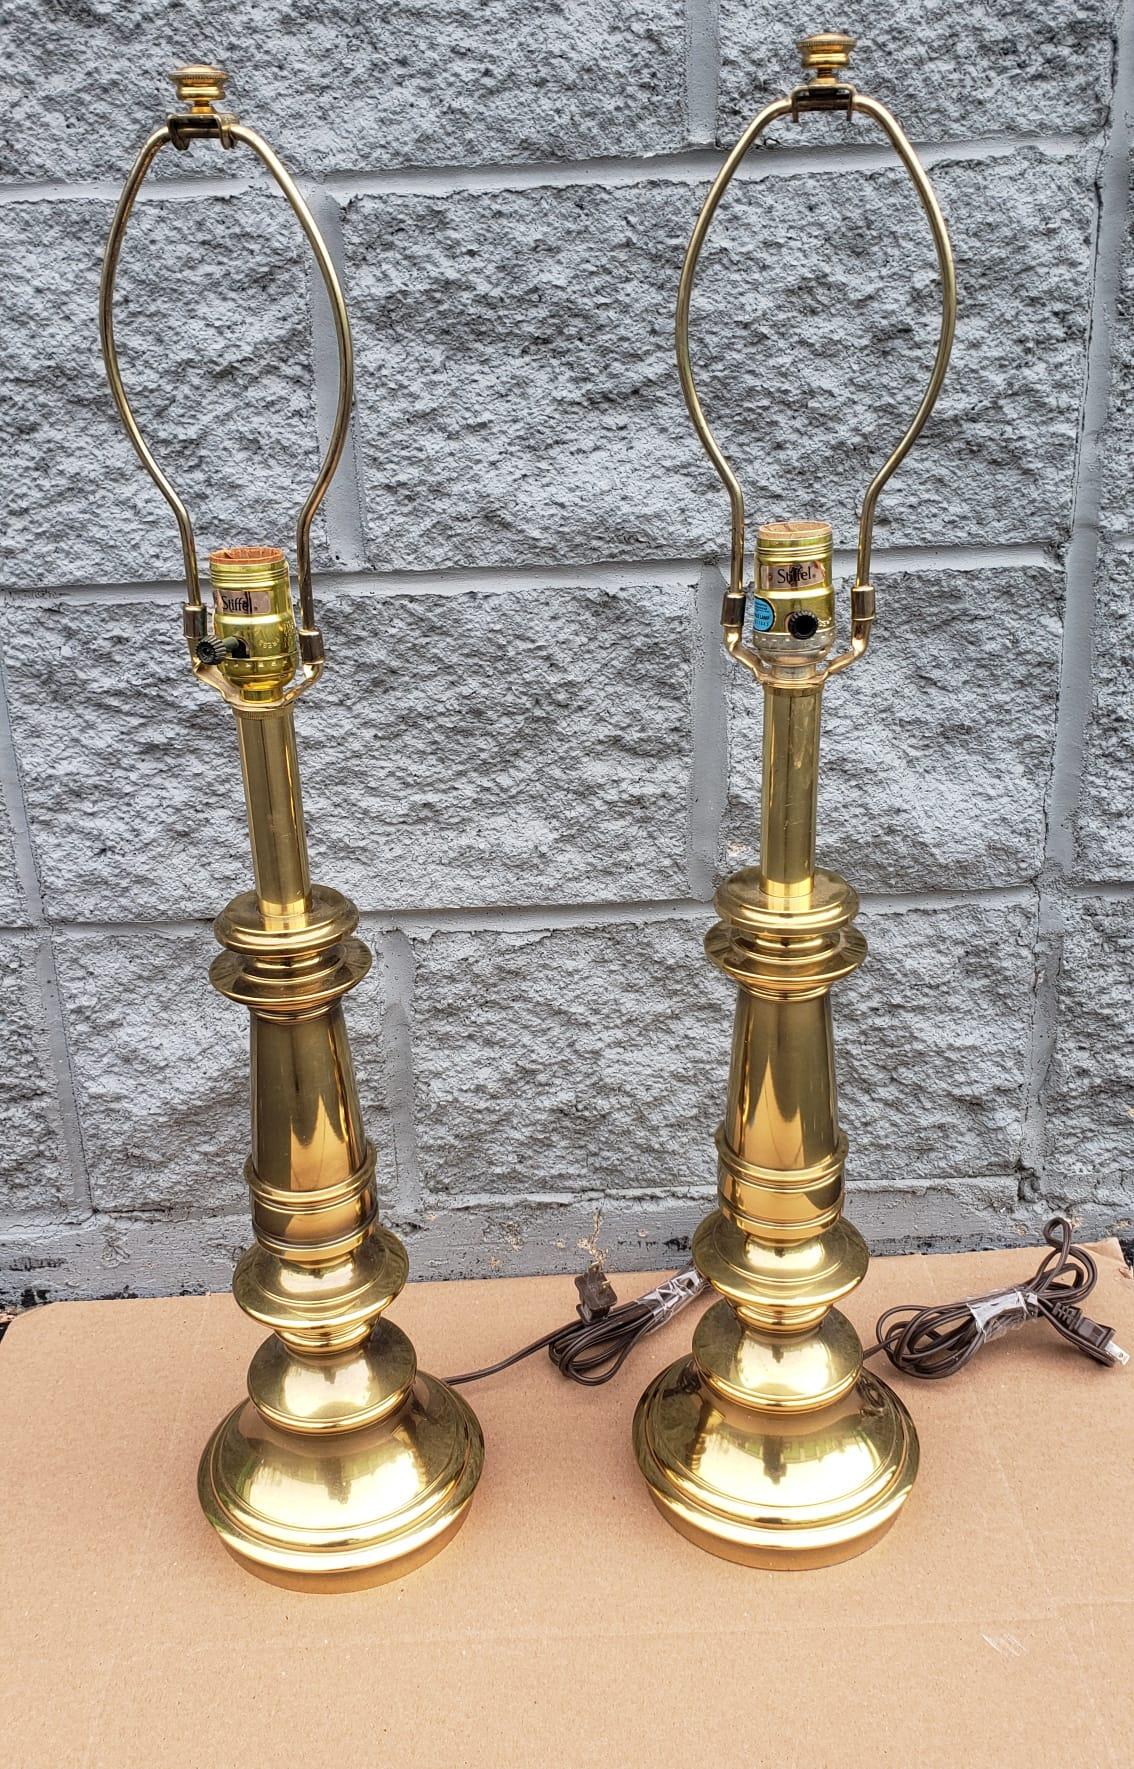 A pair of 20th century Stiffel solid polished brass table lamps in great condition.
Measures 6>25